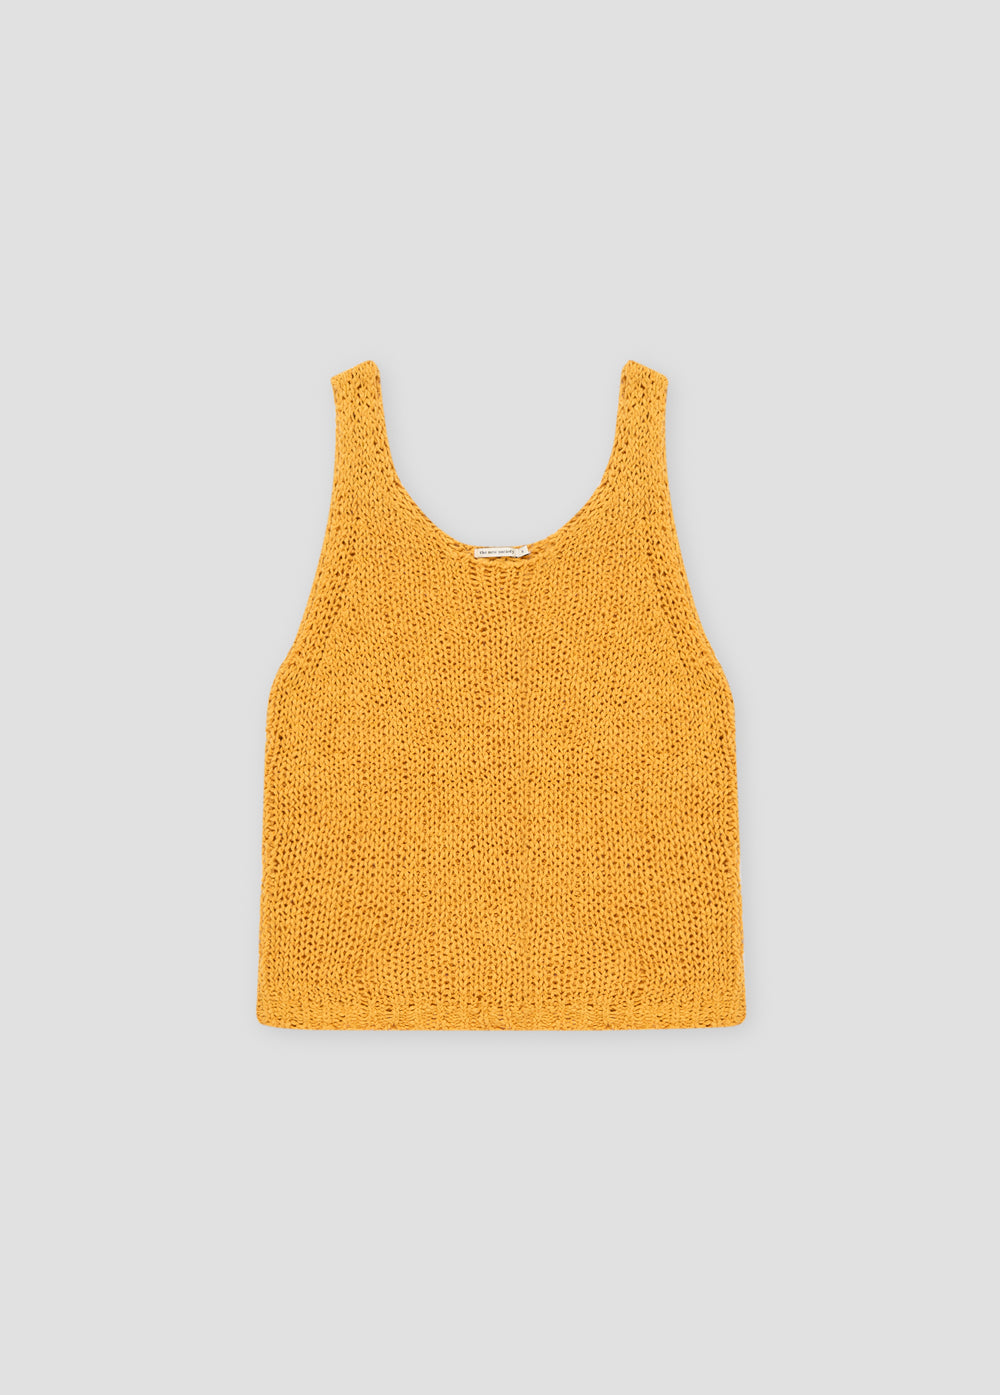 Fiore Knit Woman Top Apperol